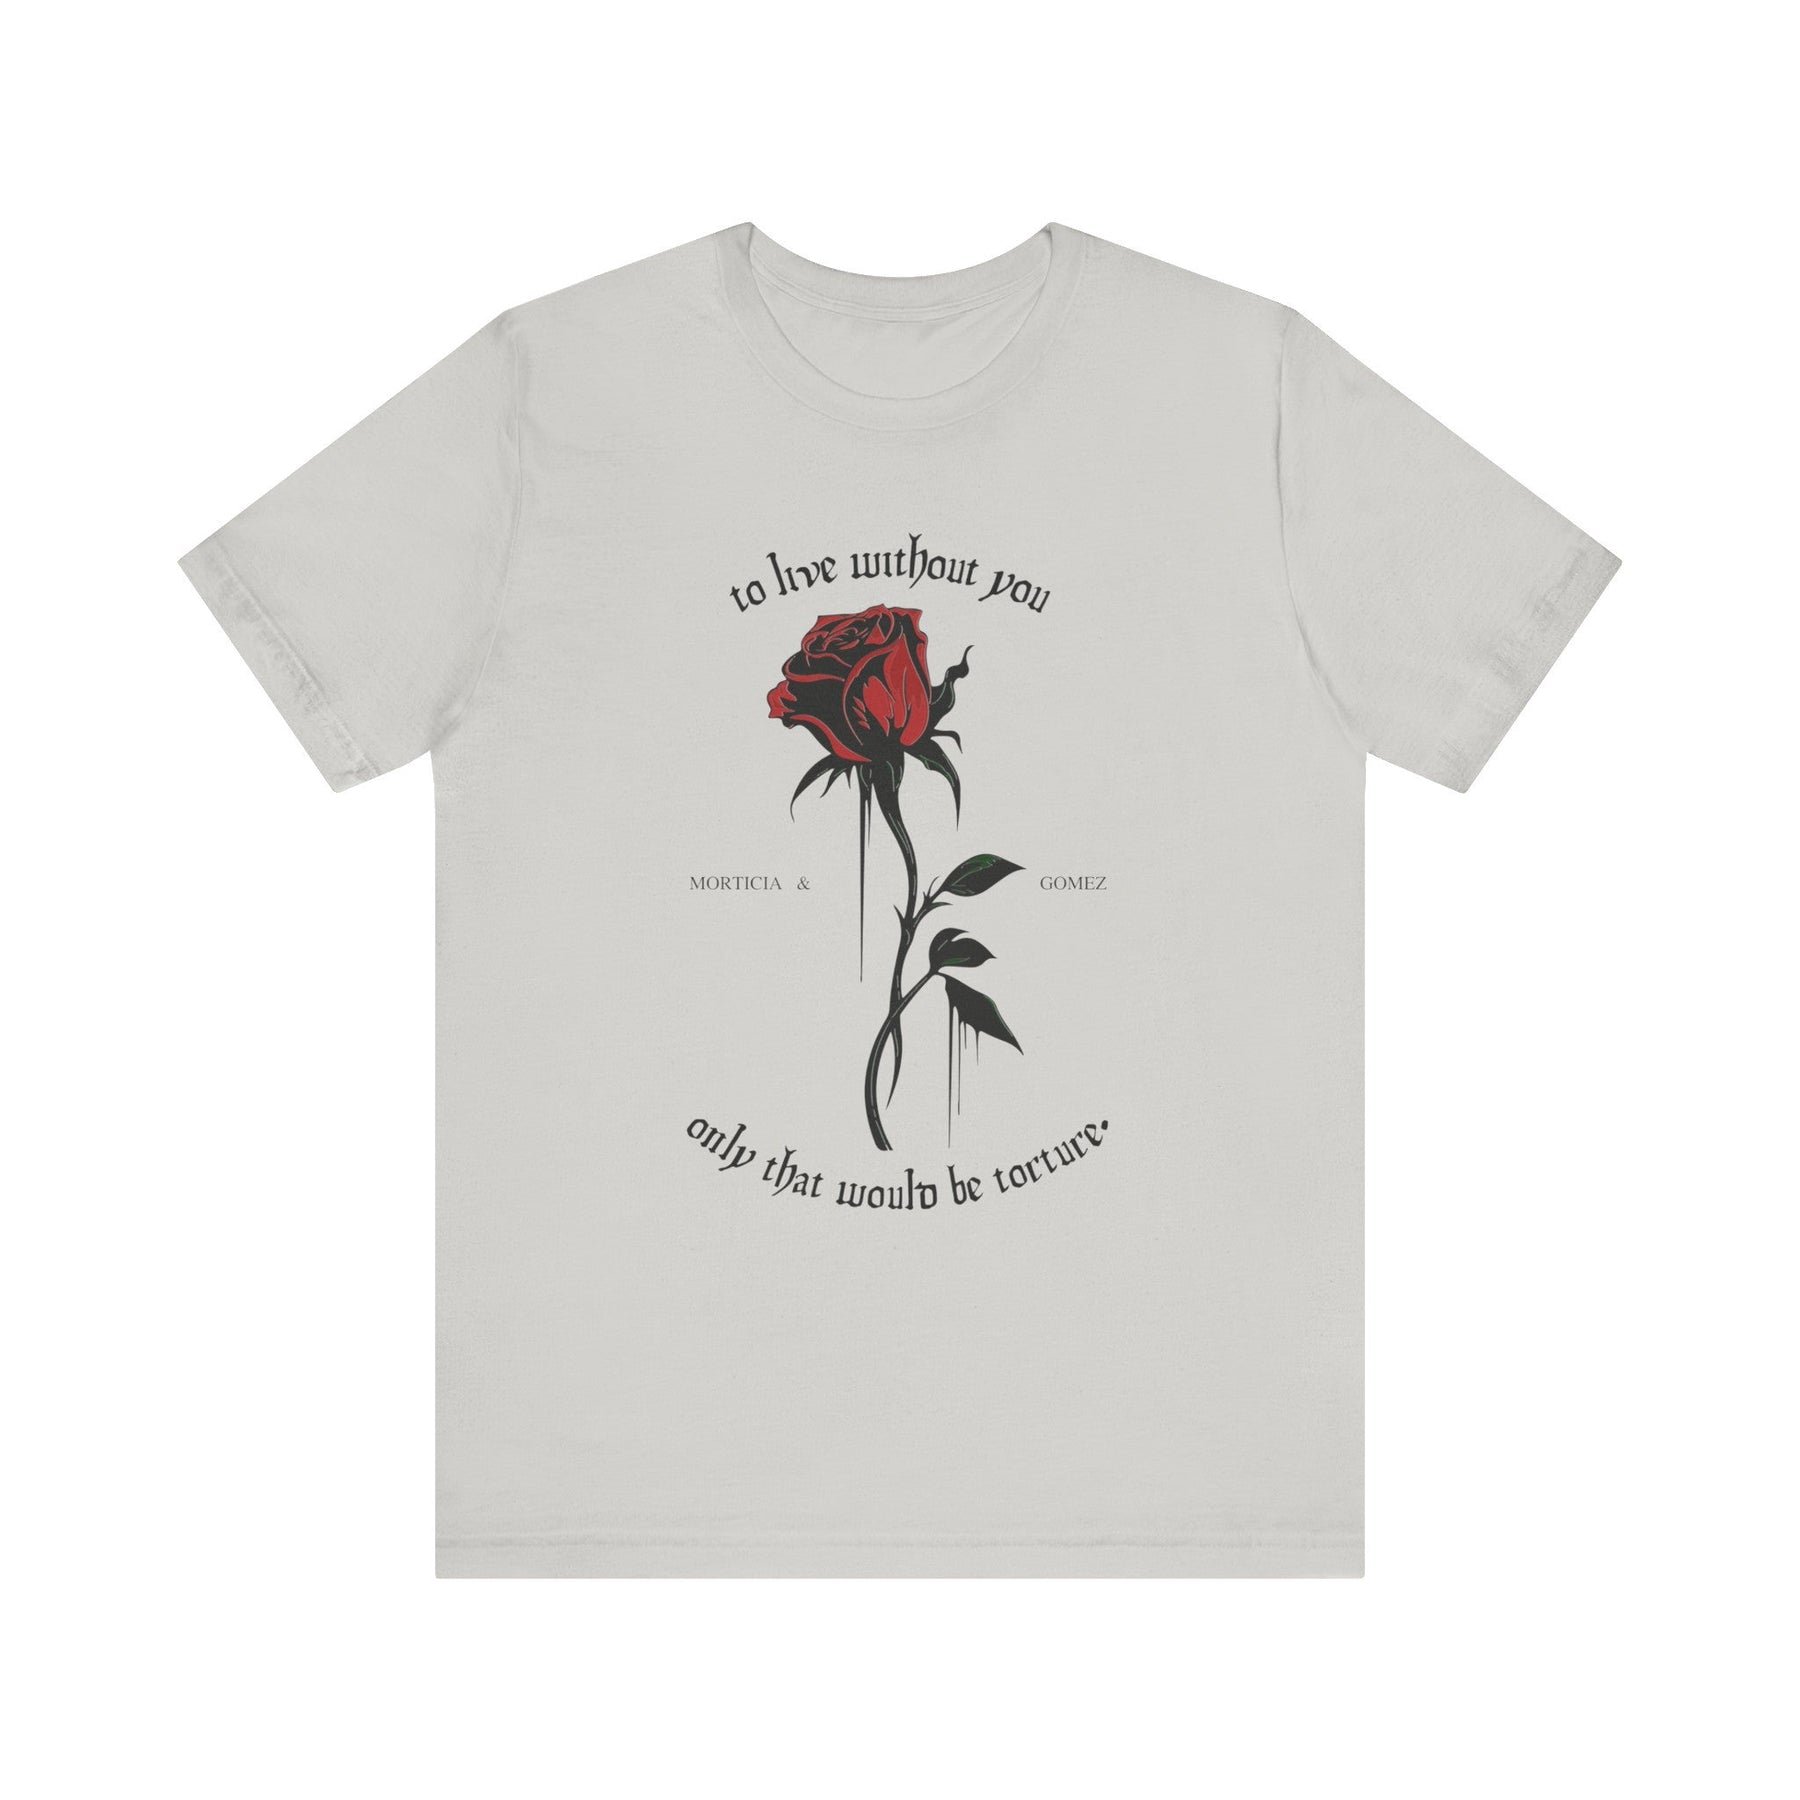 Morticia & Gomez 'To Live Without You' Gothic Rose Tee - Goth Cloth Co.T - Shirt15543662695693900605